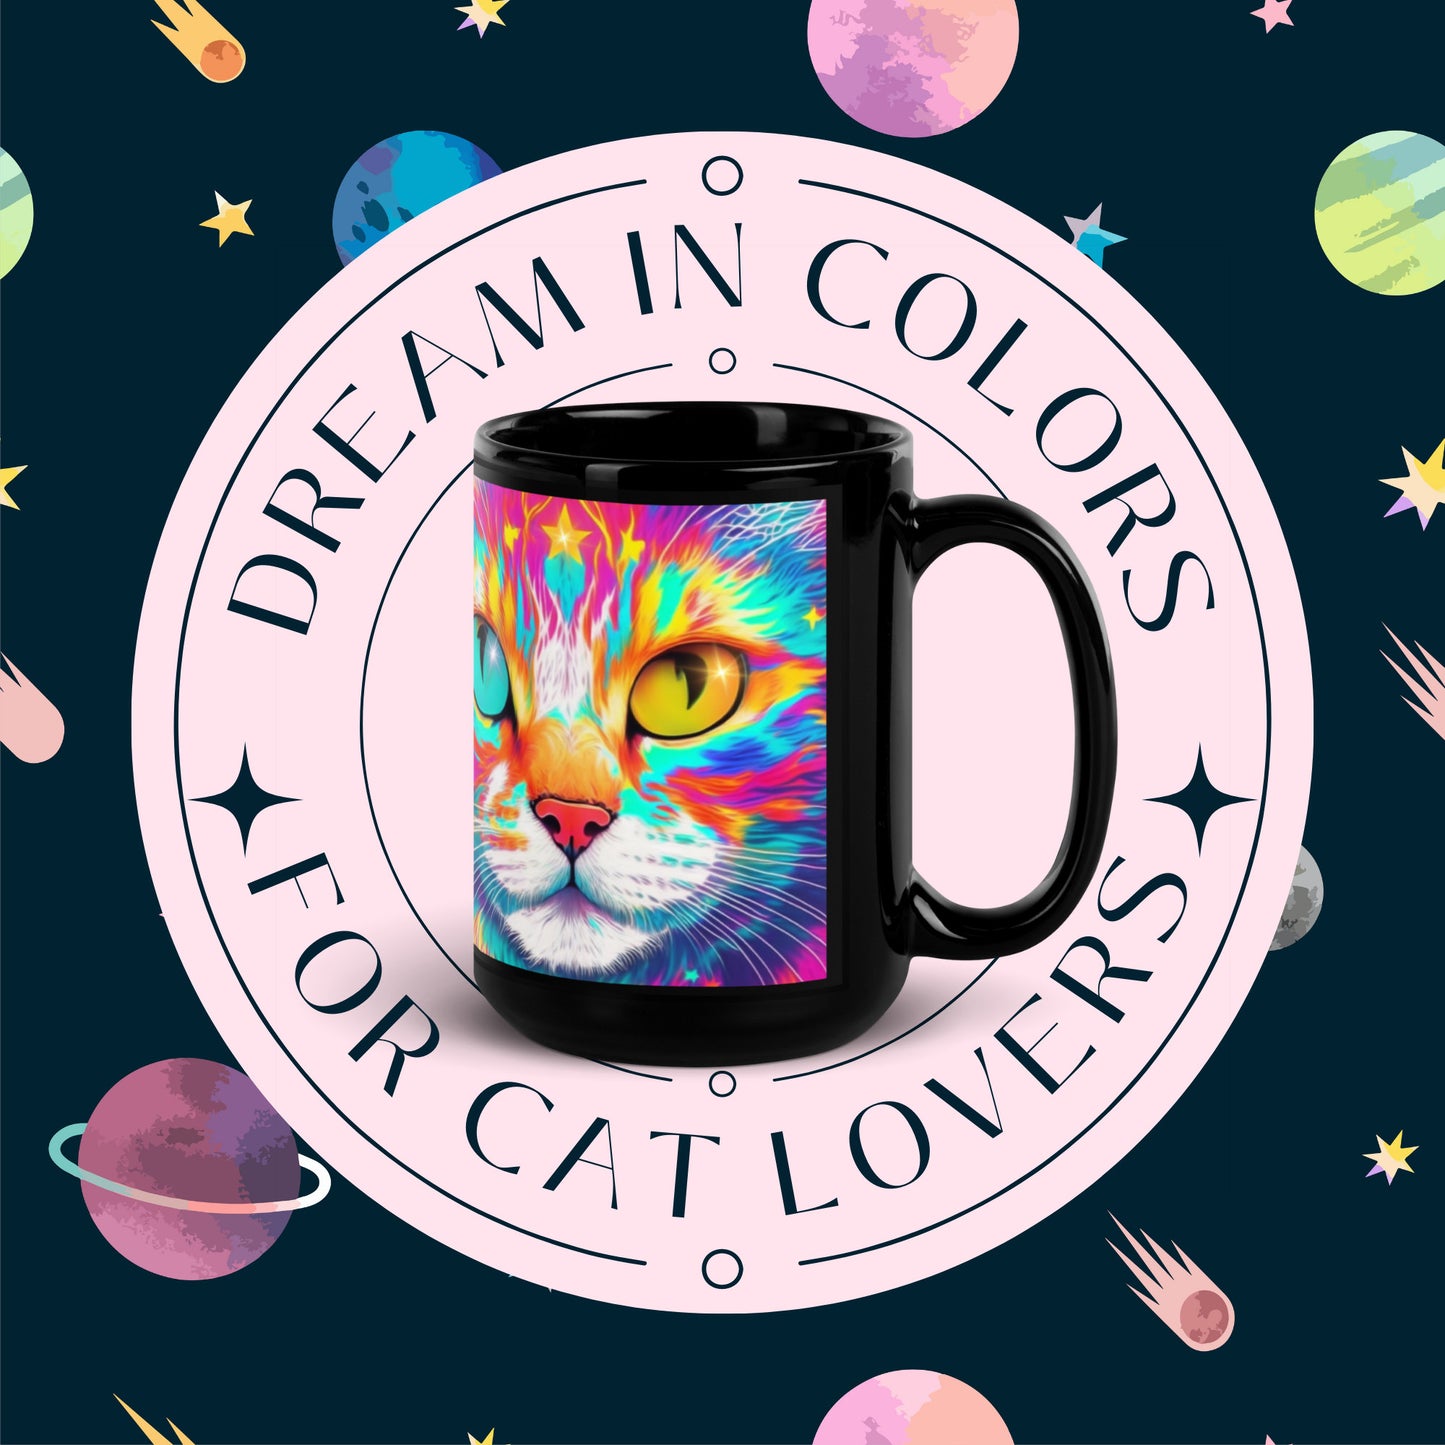 Rainbow Psychedelic Cat Mugs Colorful Gifts for Cat Lovers Mug Pop-Art Cat Mug for Cat-Lady Gifts for Cat Daddy Mug Cosmic Cat Mug